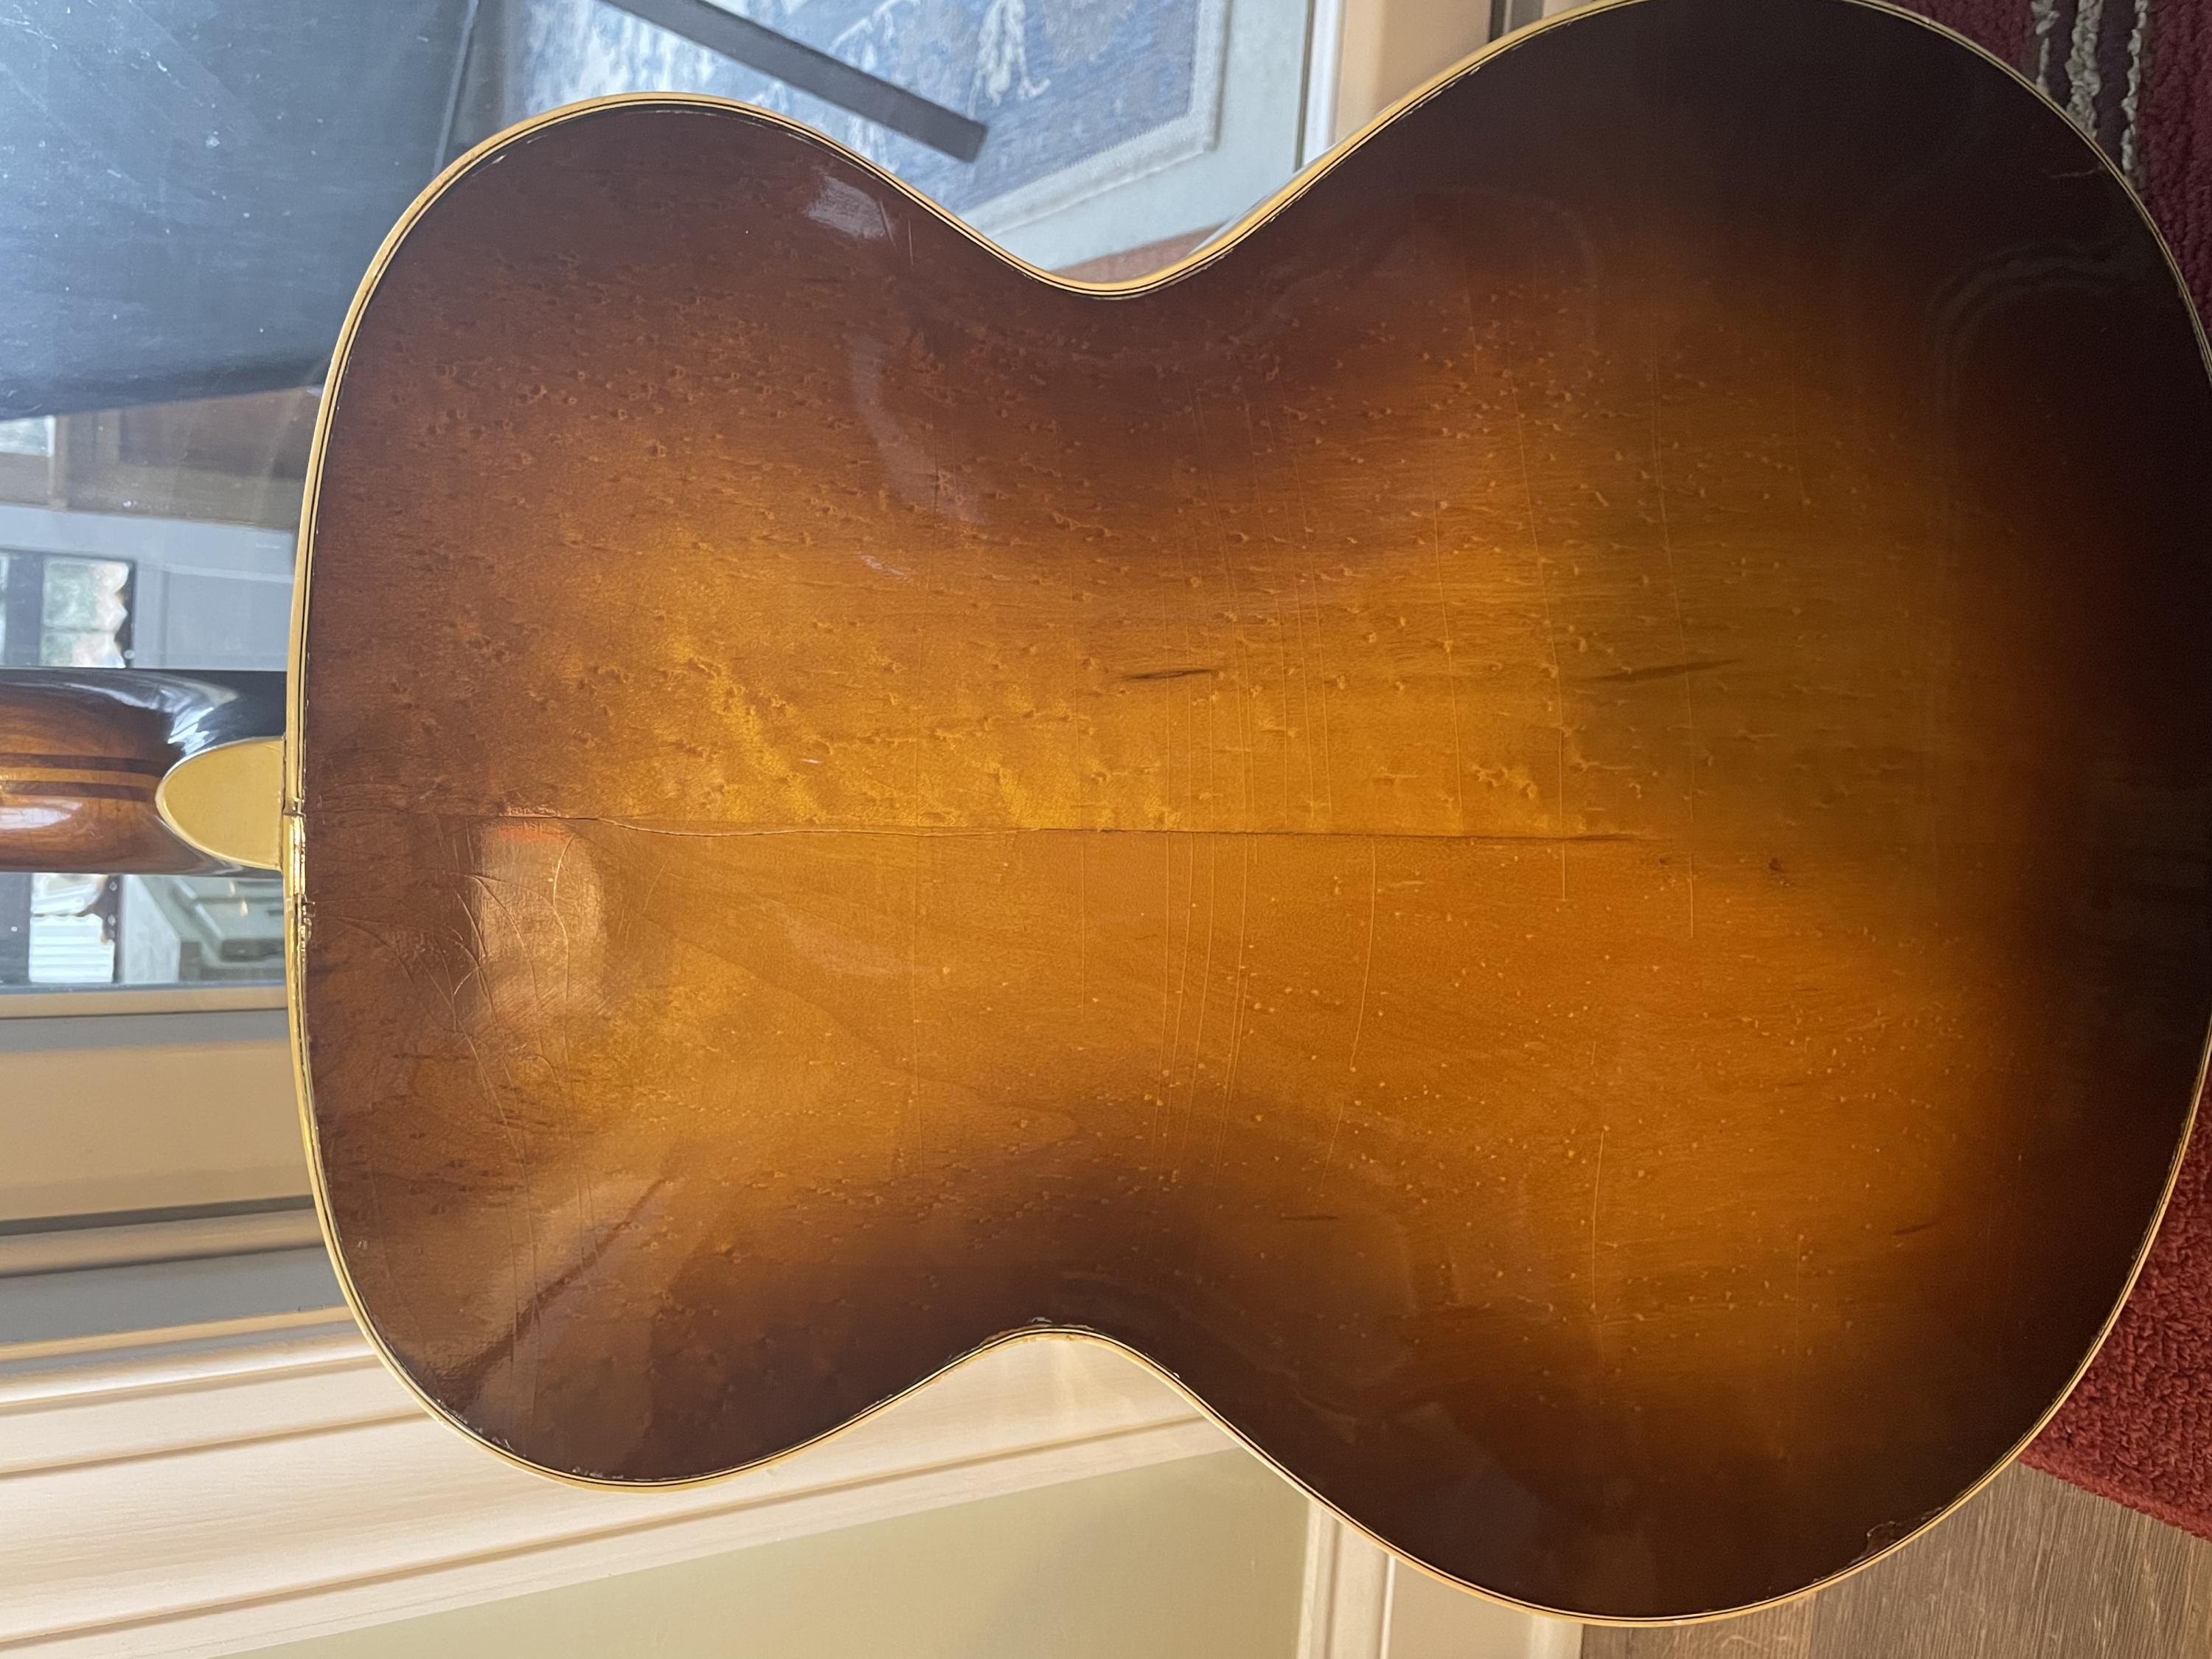 1947 Epiphone Broadway with split in back. Need Luthier in NJ, PA area-eca9b271-5e4a-4e1d-b84c-a3a8cdb5da9e-jpg